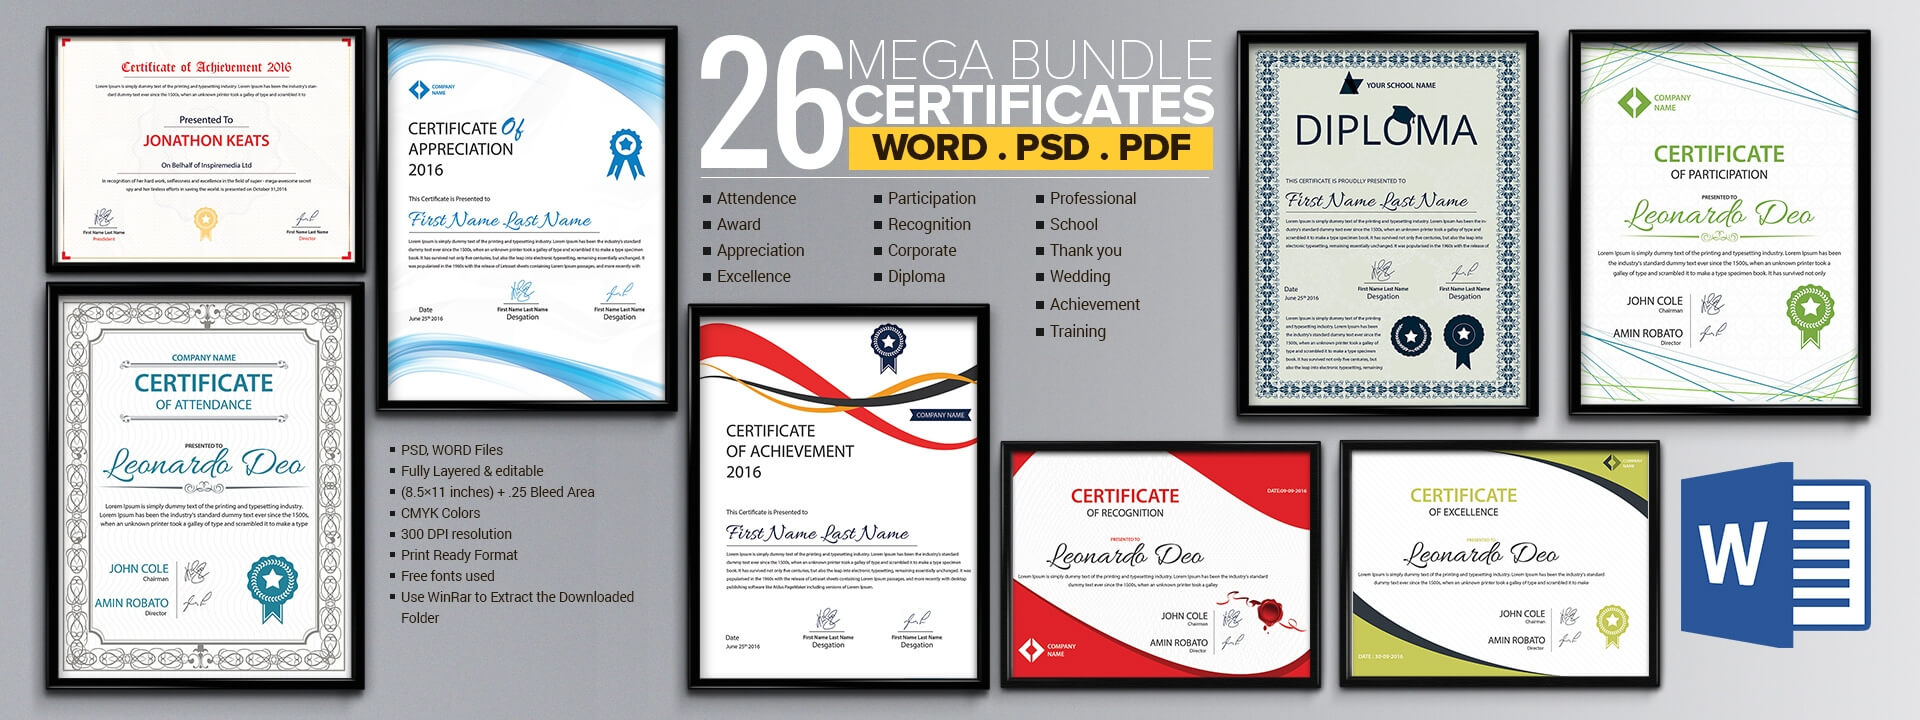 Word Certificate Template - 53+ Free Download Samples Within Free Certificate Templates For Word 2007